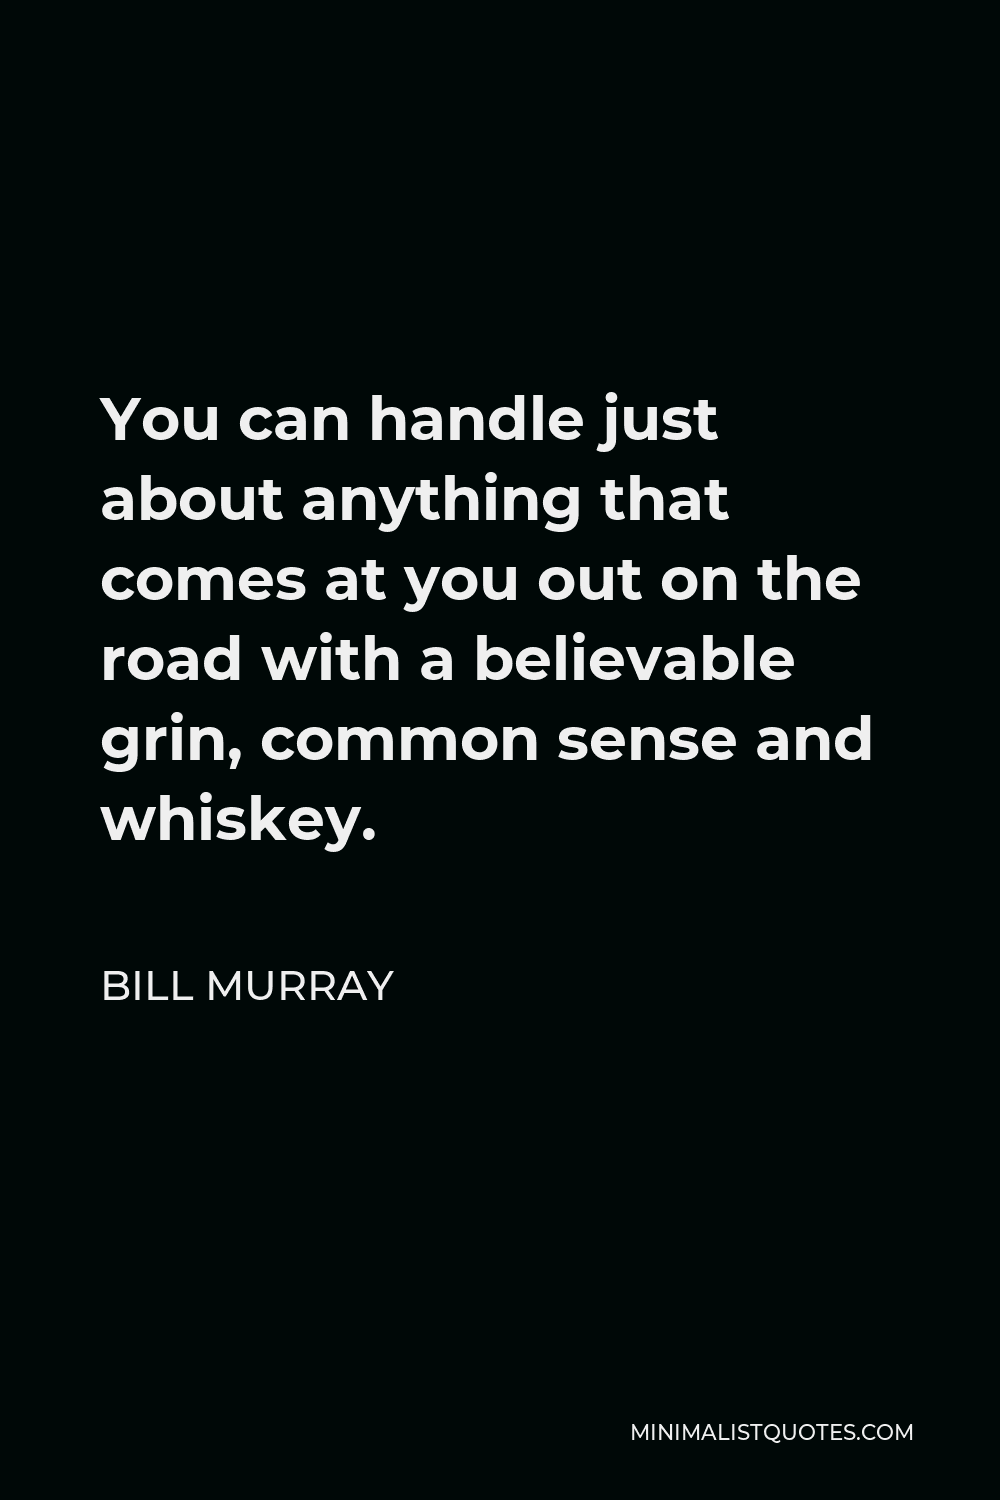 Bill Murray Quote - You can handle just about anything that comes at you out on the road with a believable grin, common sense and whiskey.